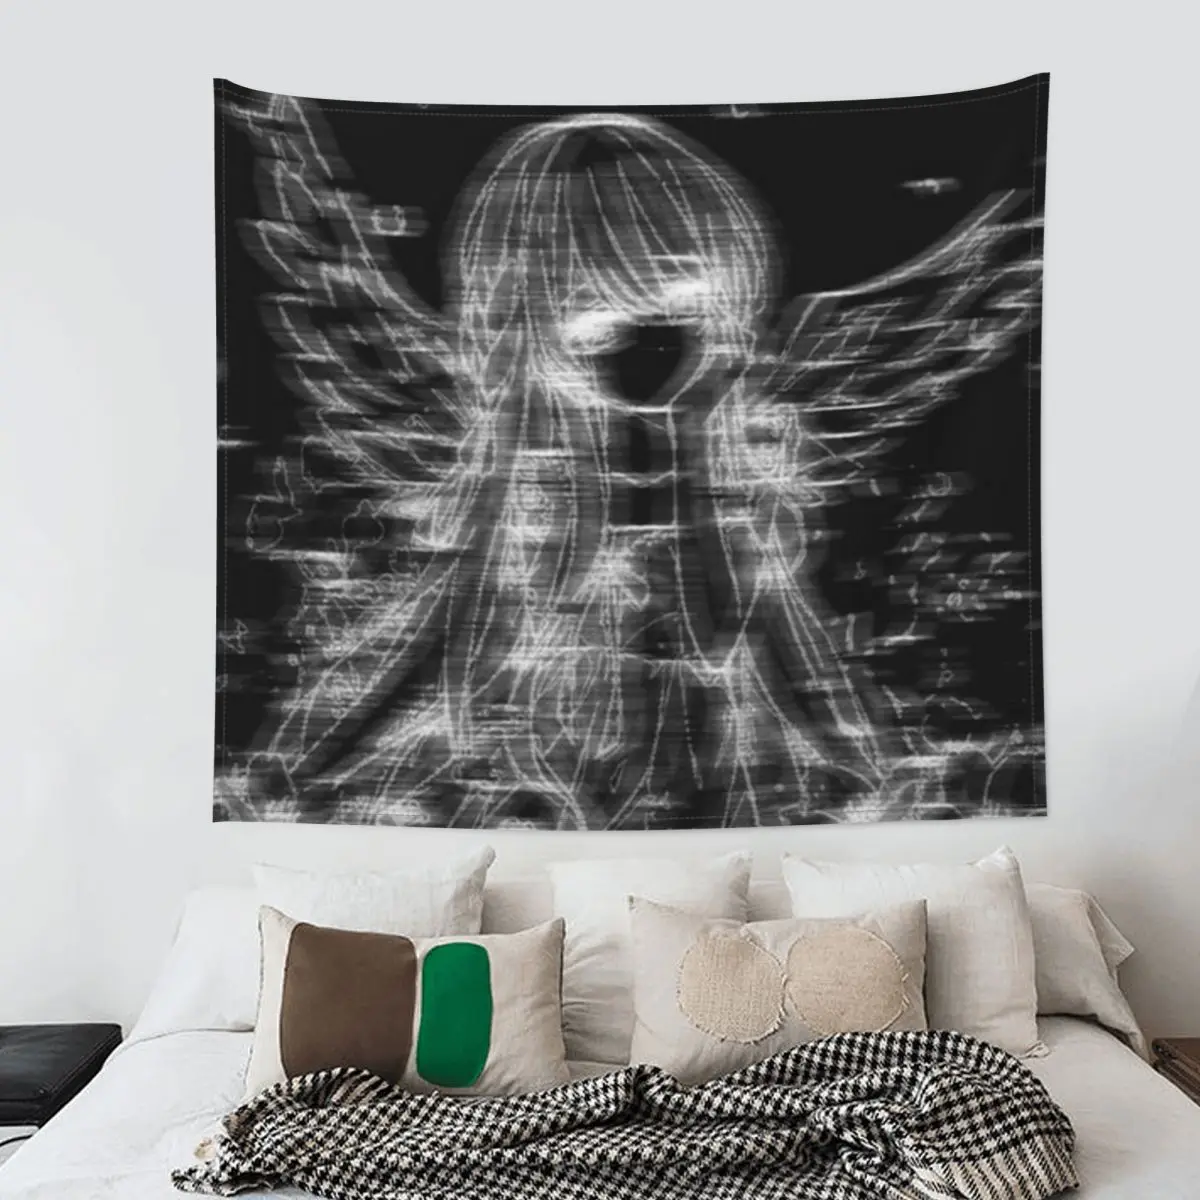 Goth Anime Aesthetic Tapestry Hippie Fabric Wall Hanging Wall Decor Curtain Witchcraft Blanket